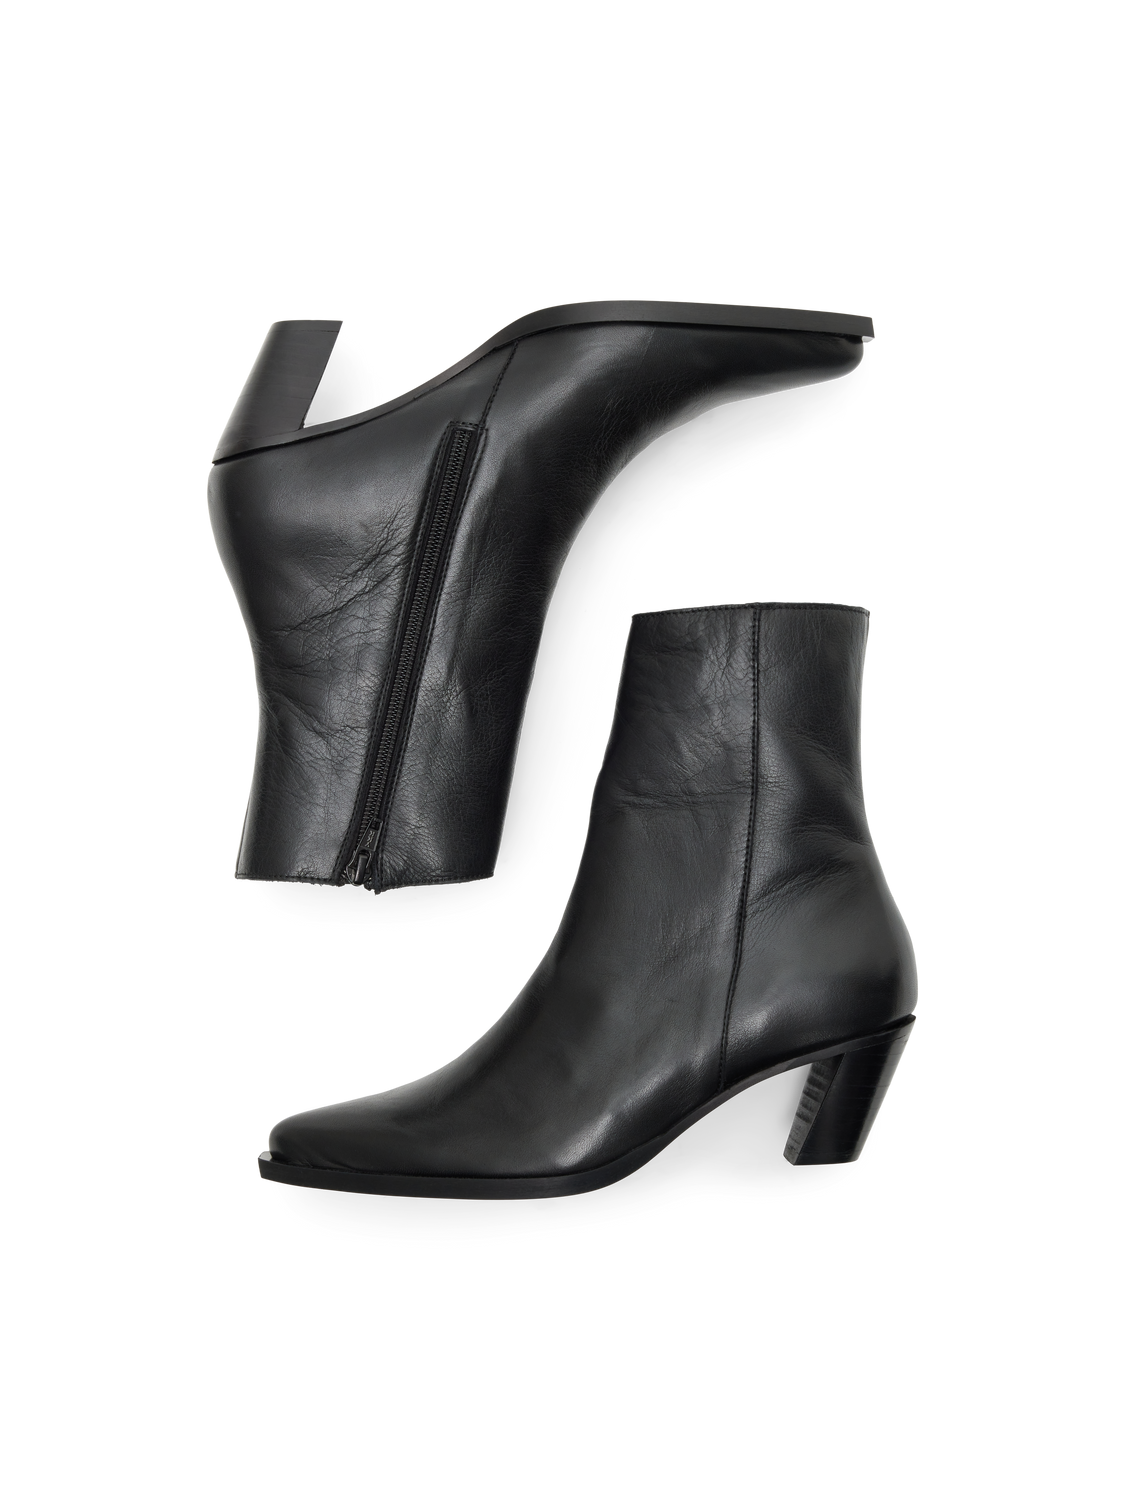 SELECTED FEMME - STELLA Boots - Black